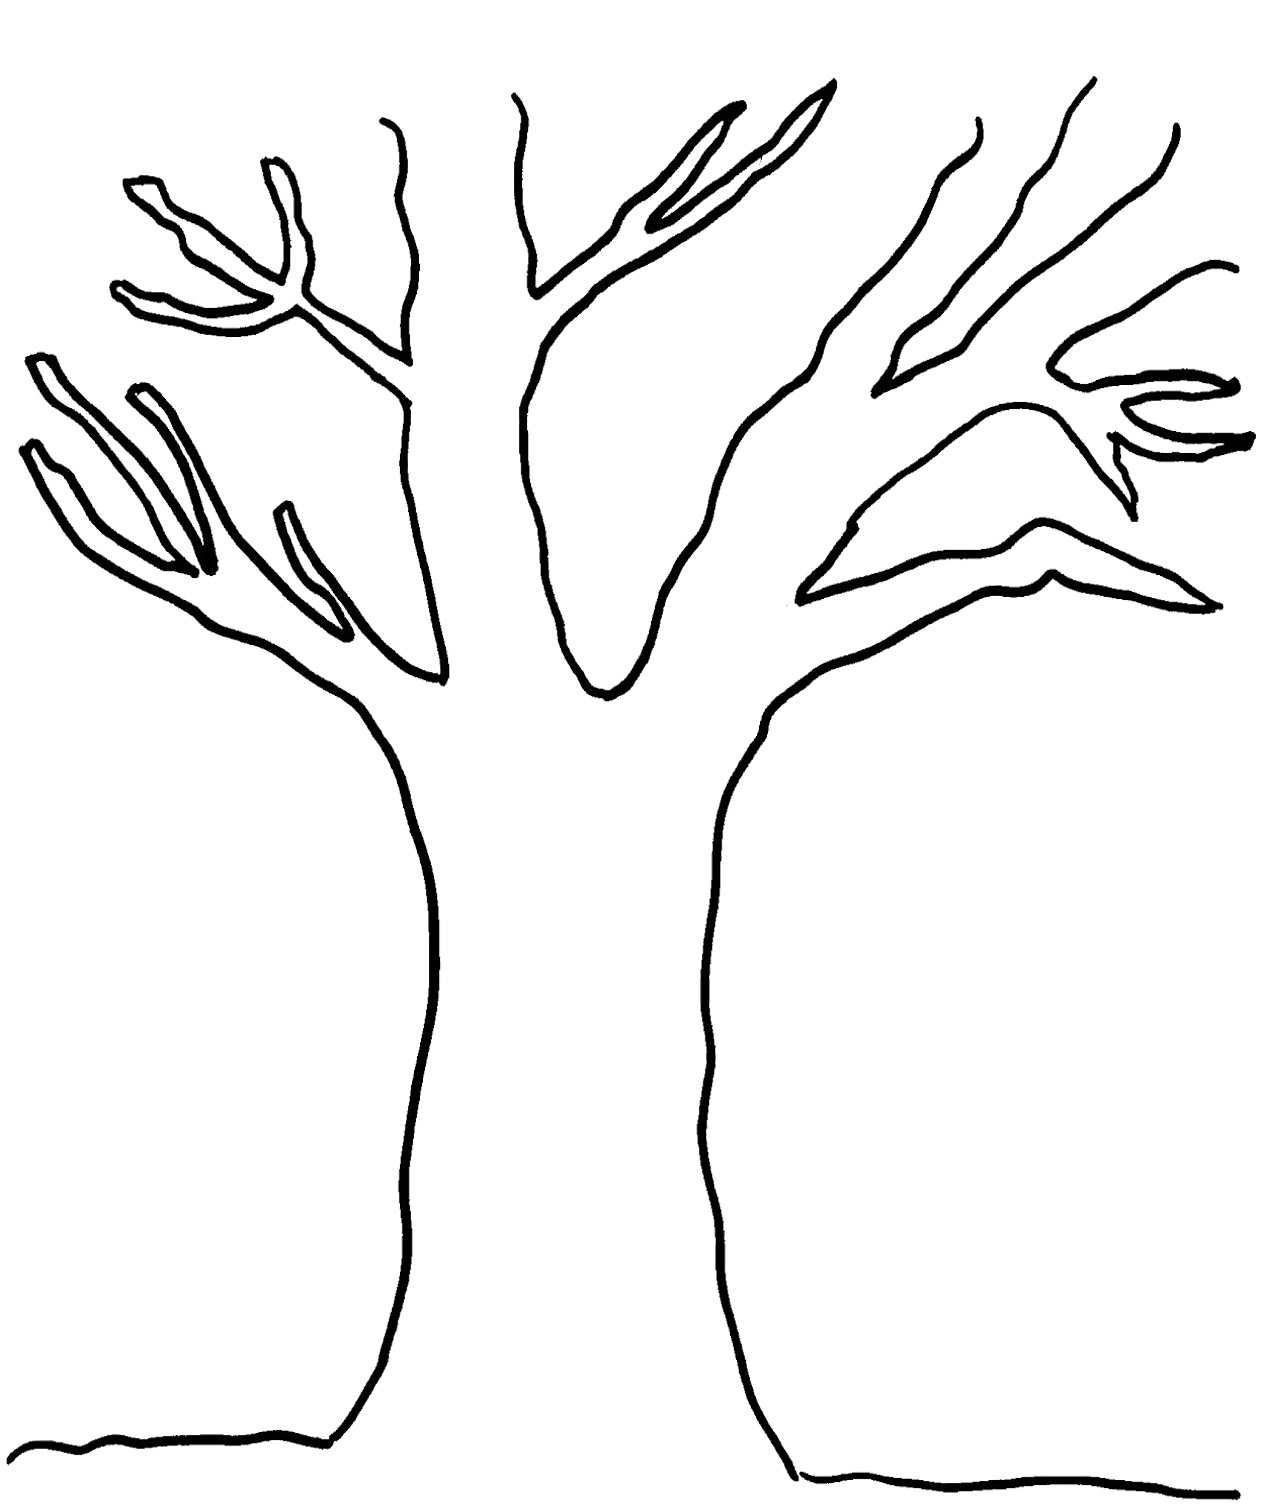 8 Best Images of Printable Trees With No Leaves - Tree with No Leaves